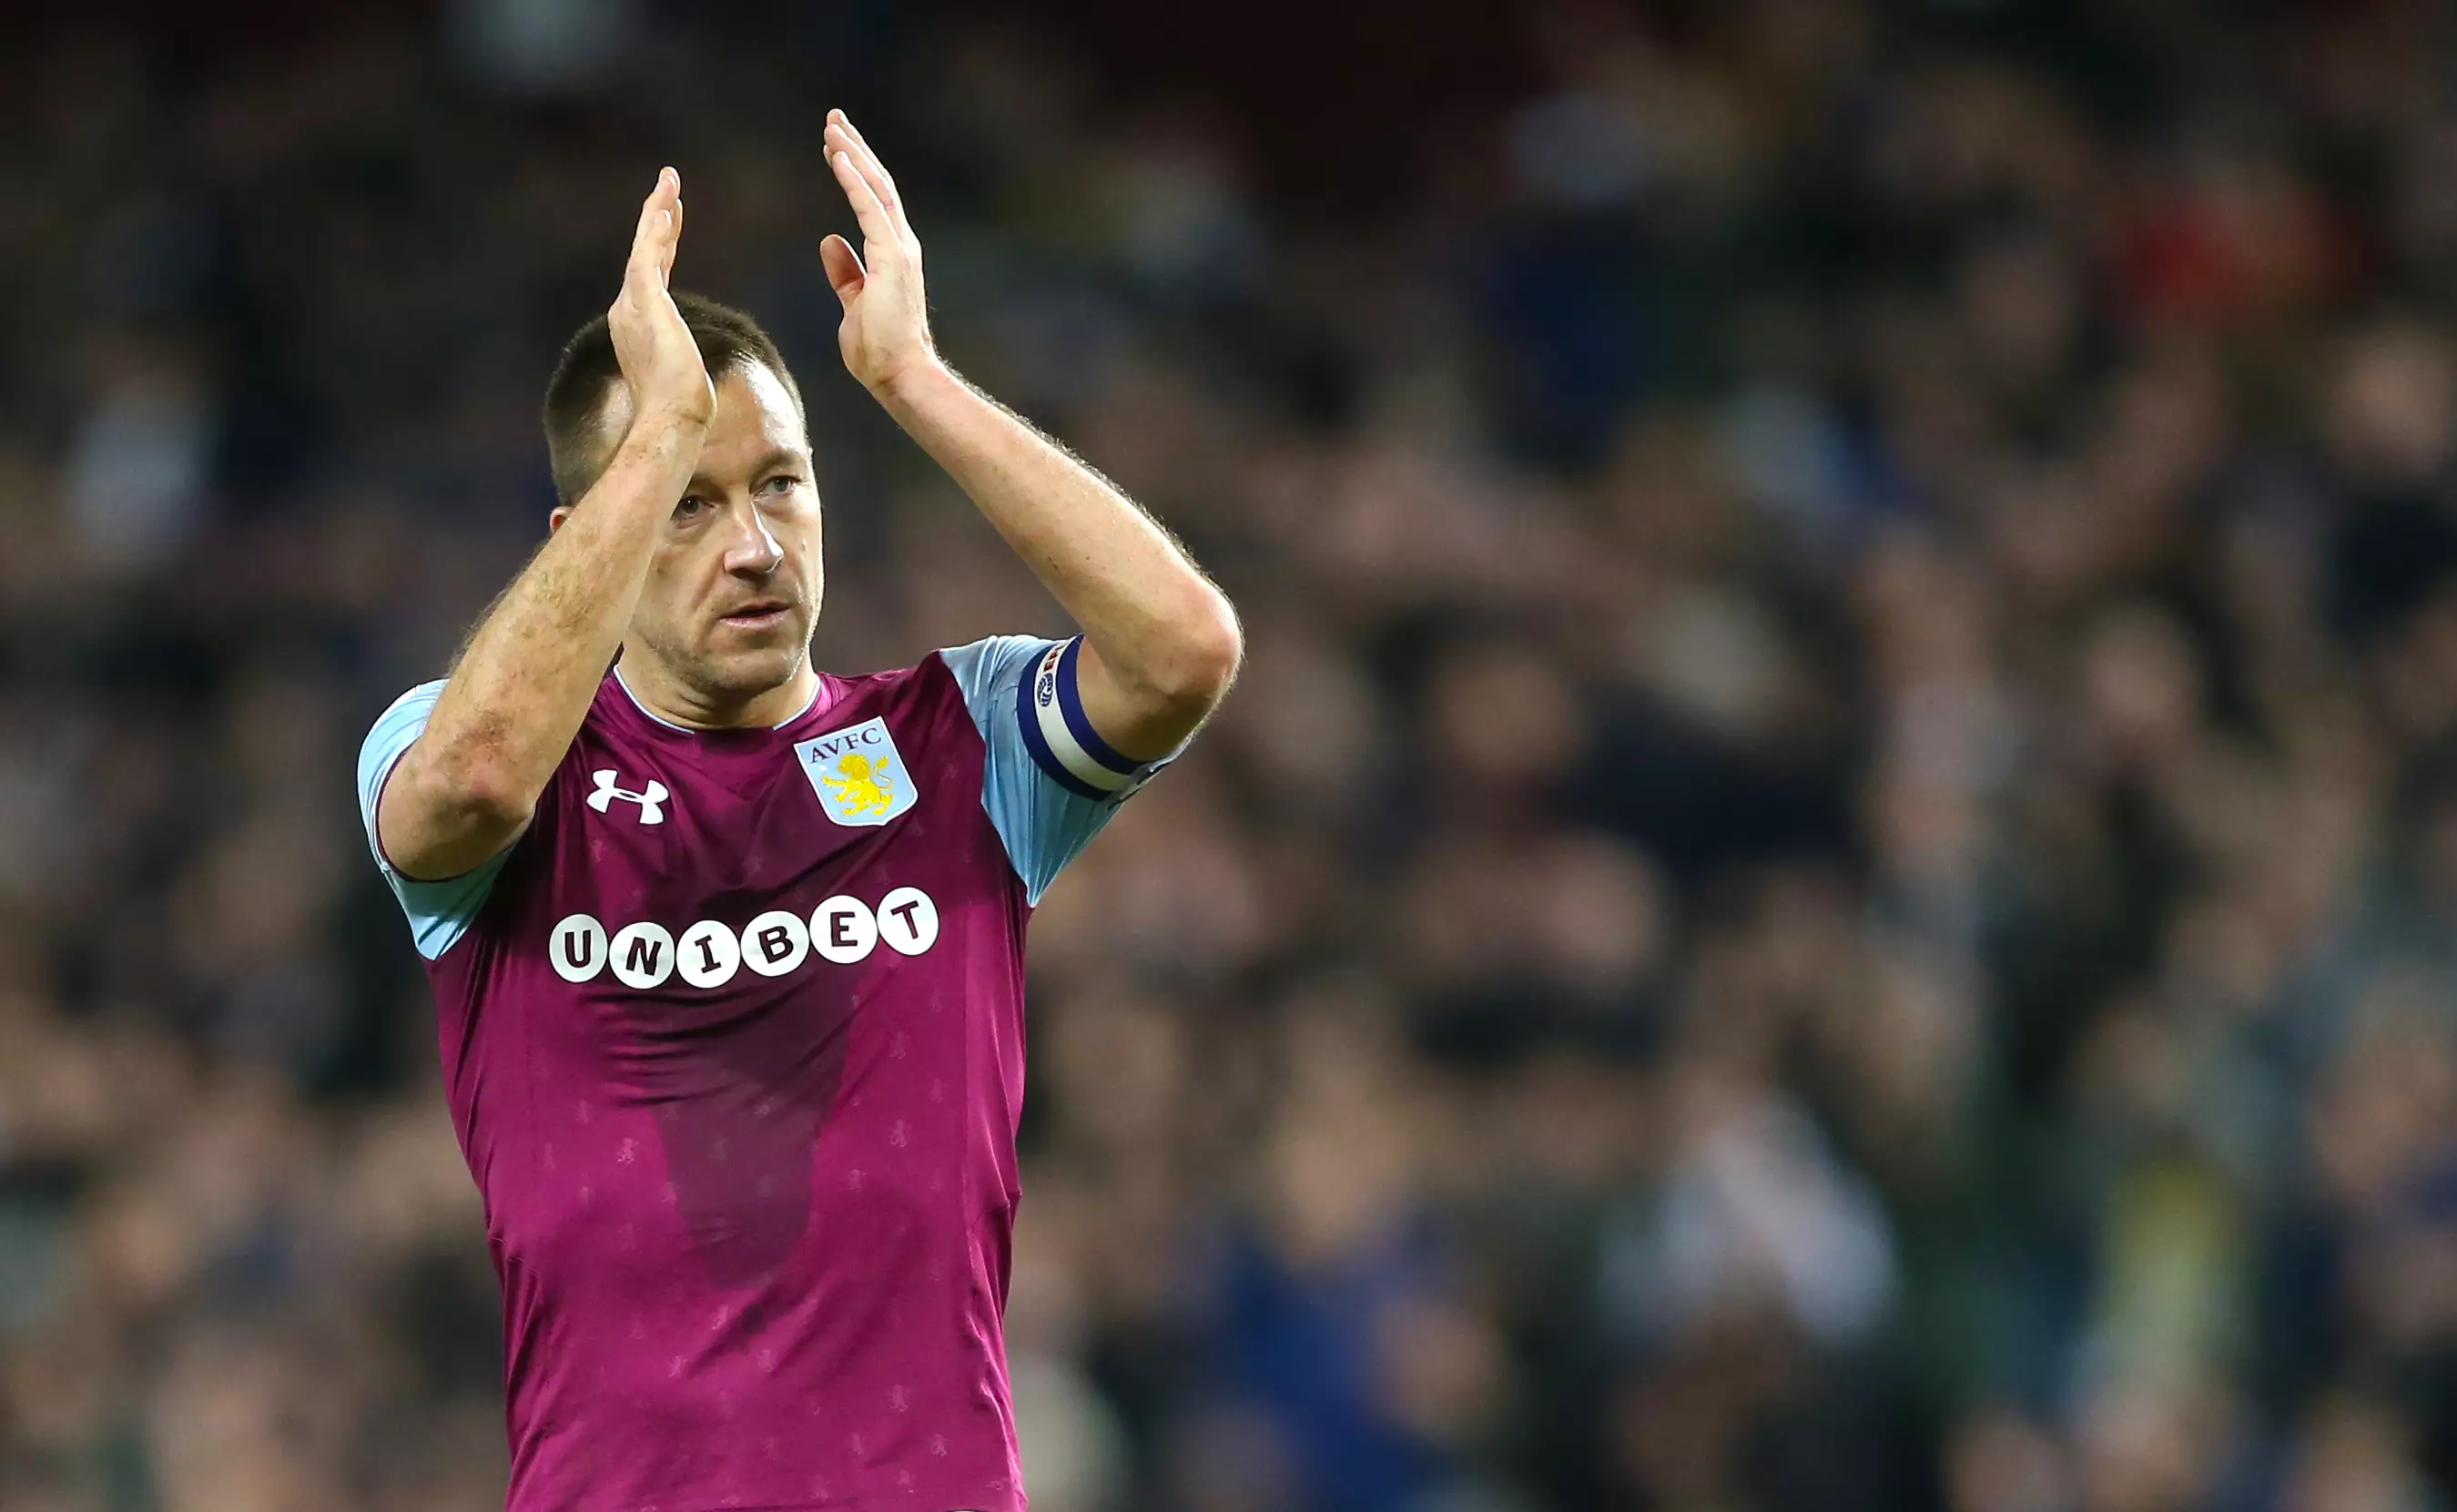 Terry is leaving Villa Park after just one season. Image: PA Images